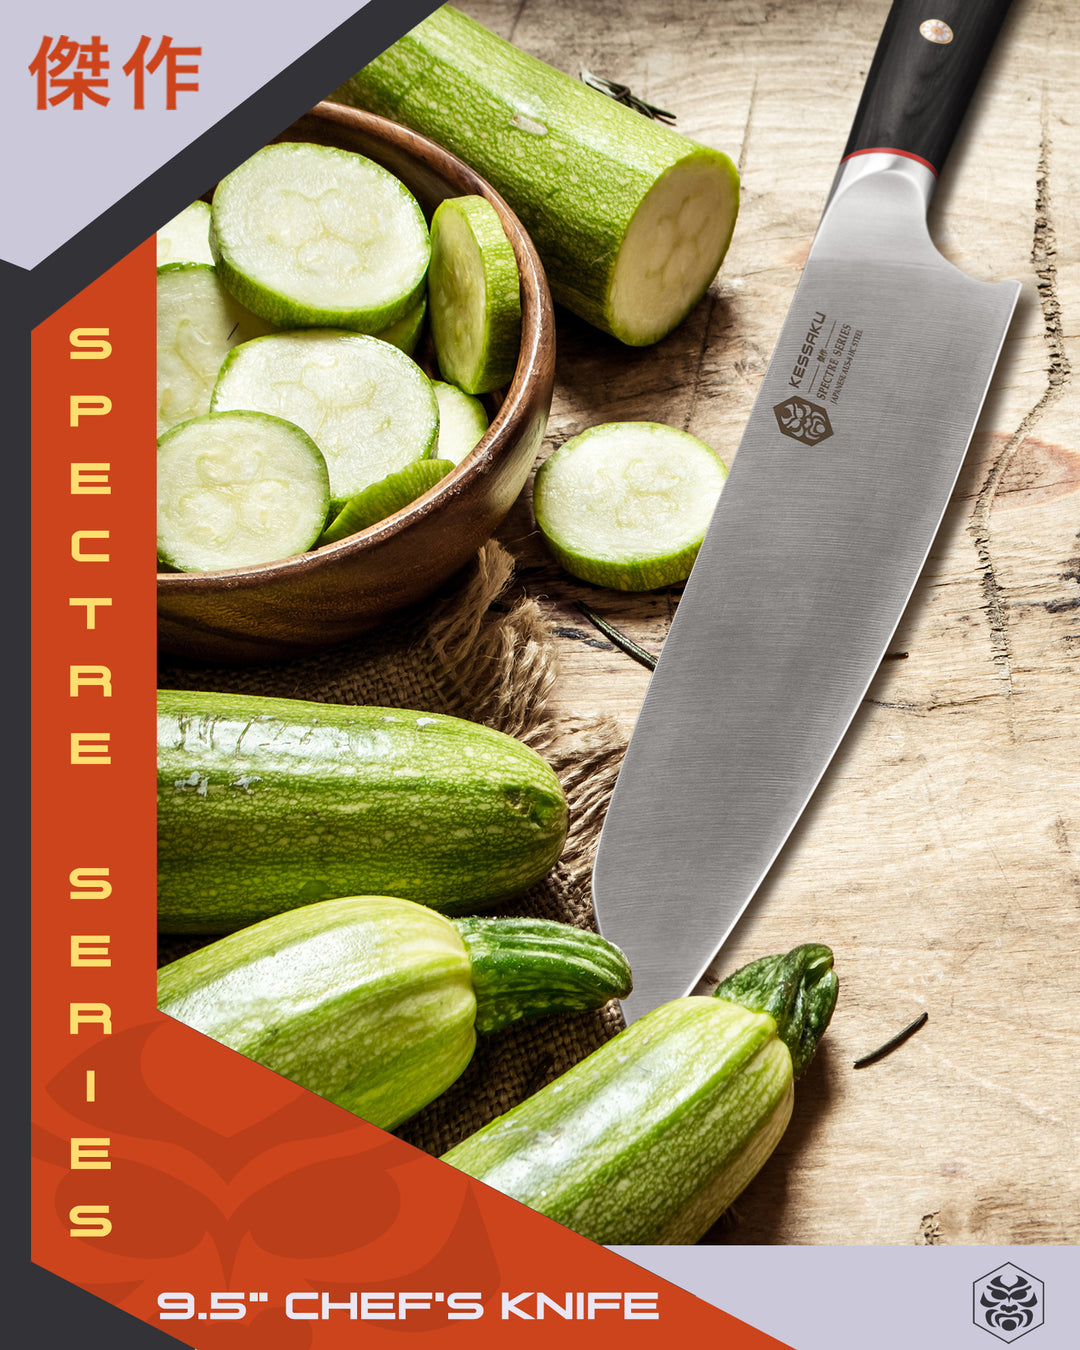 The Spectre K-Tip Chef's Knife next to sliced zucchini